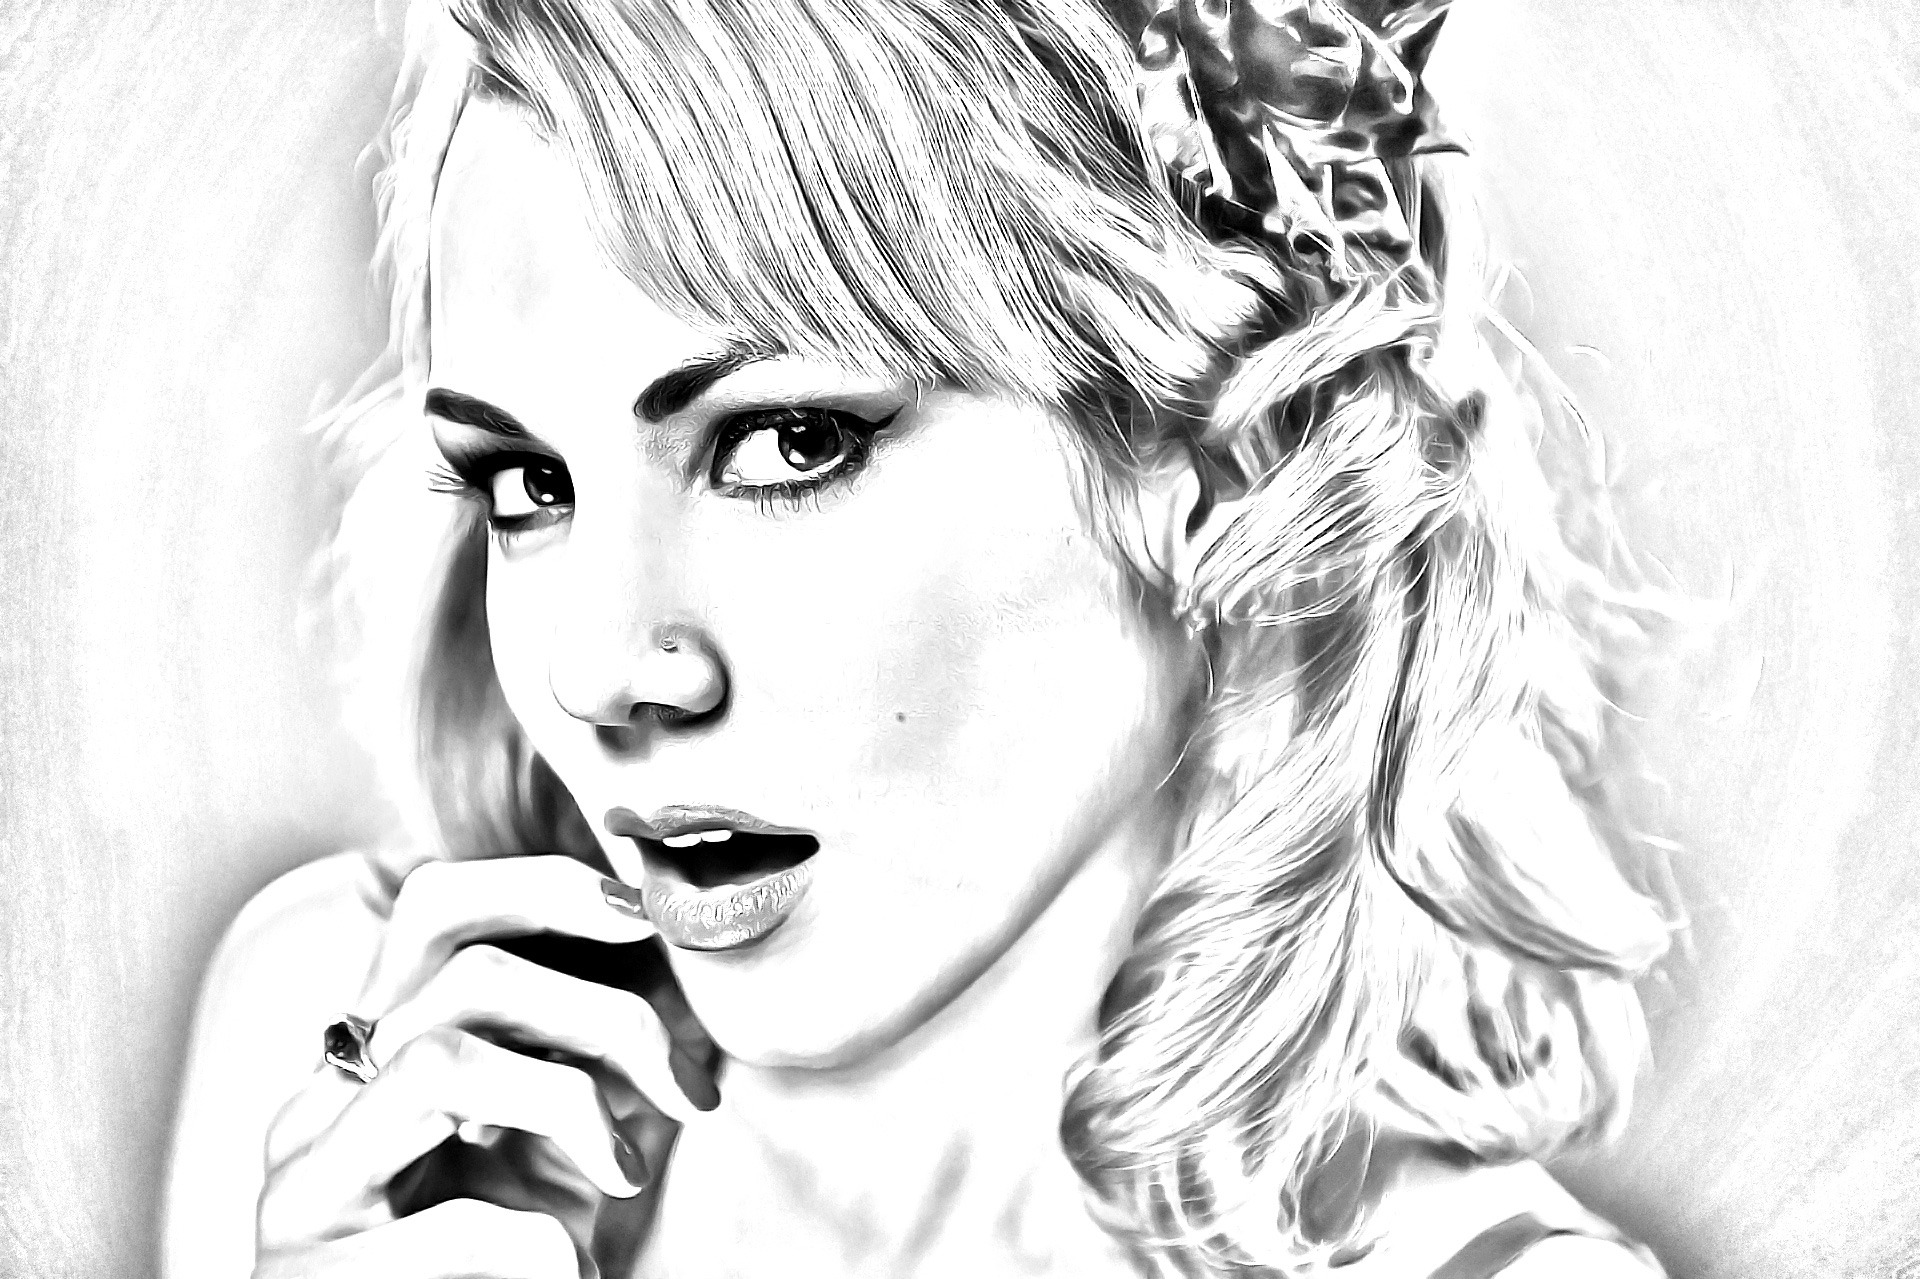 Photoshop Drawing Effect - Pencil Drawing (Sketch Effect) - Photoshop